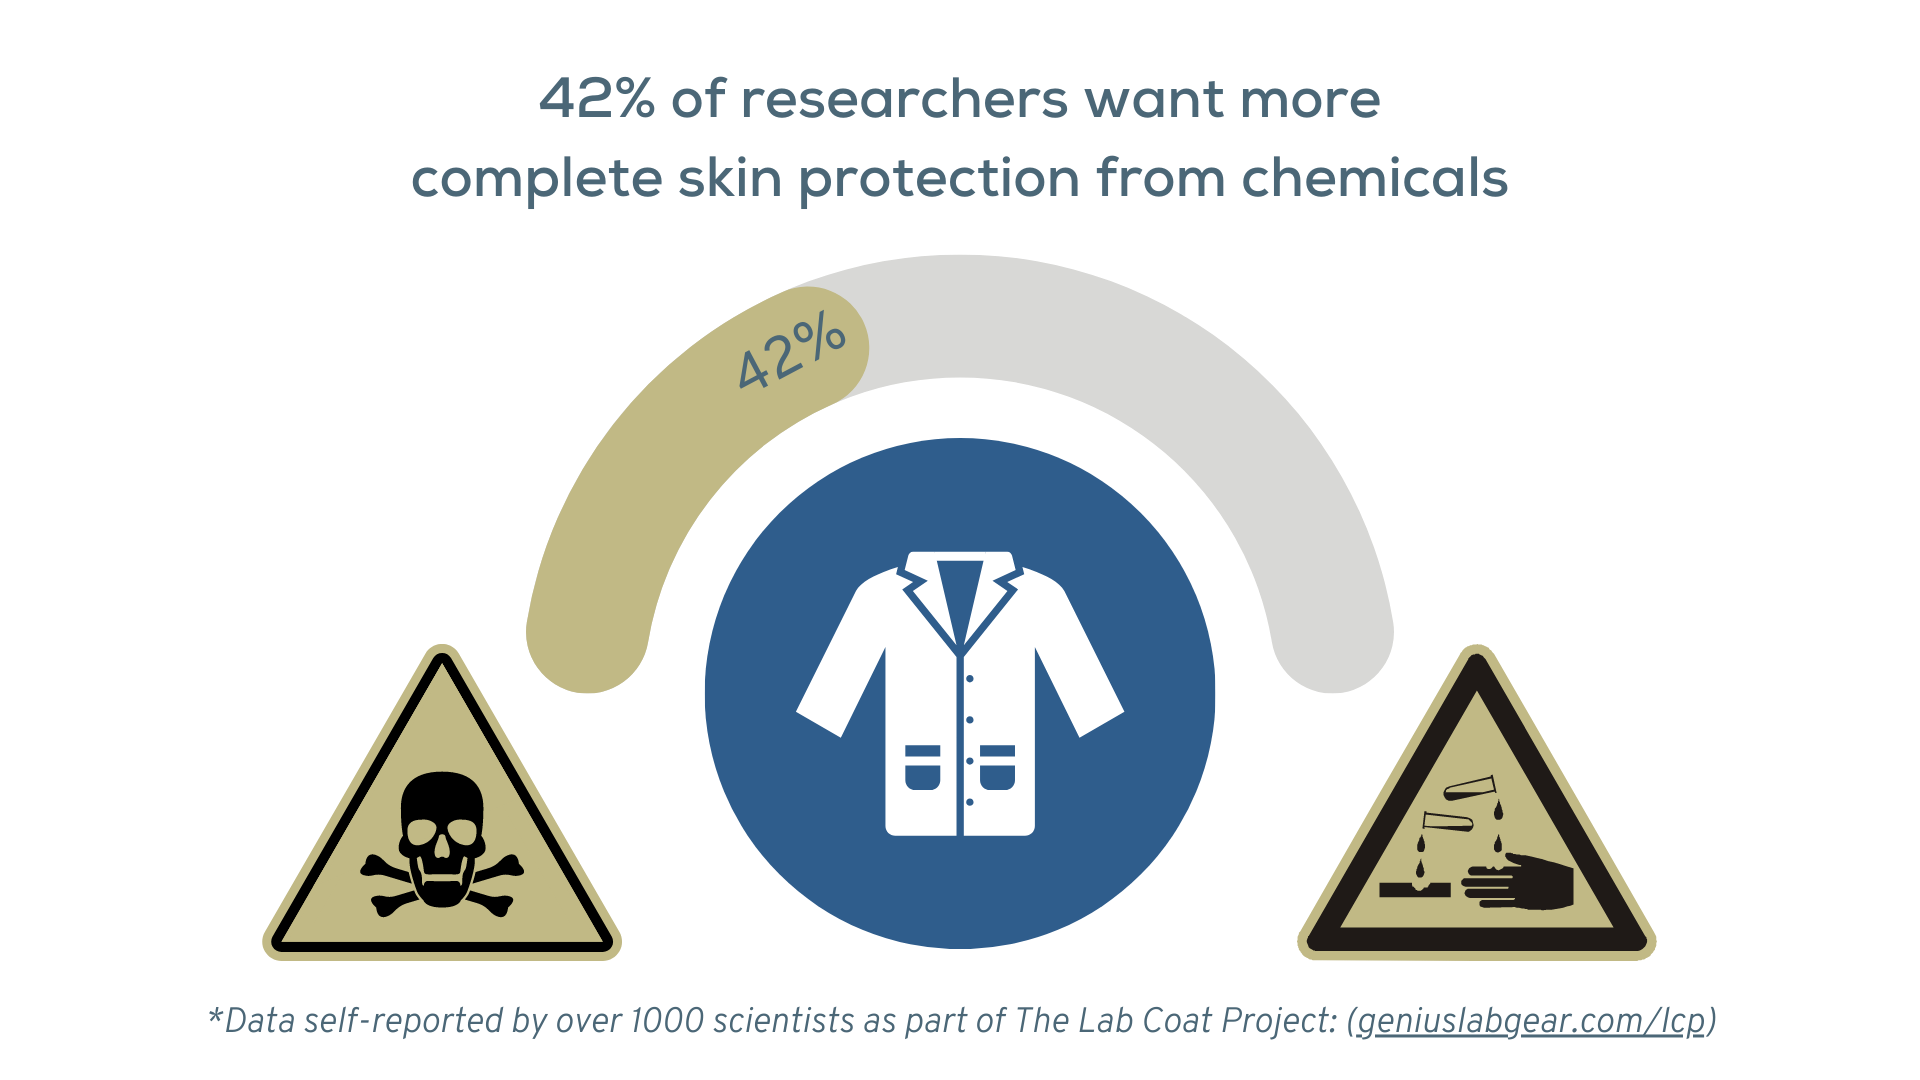 42 percent of researchers want better skin protection from chemicals